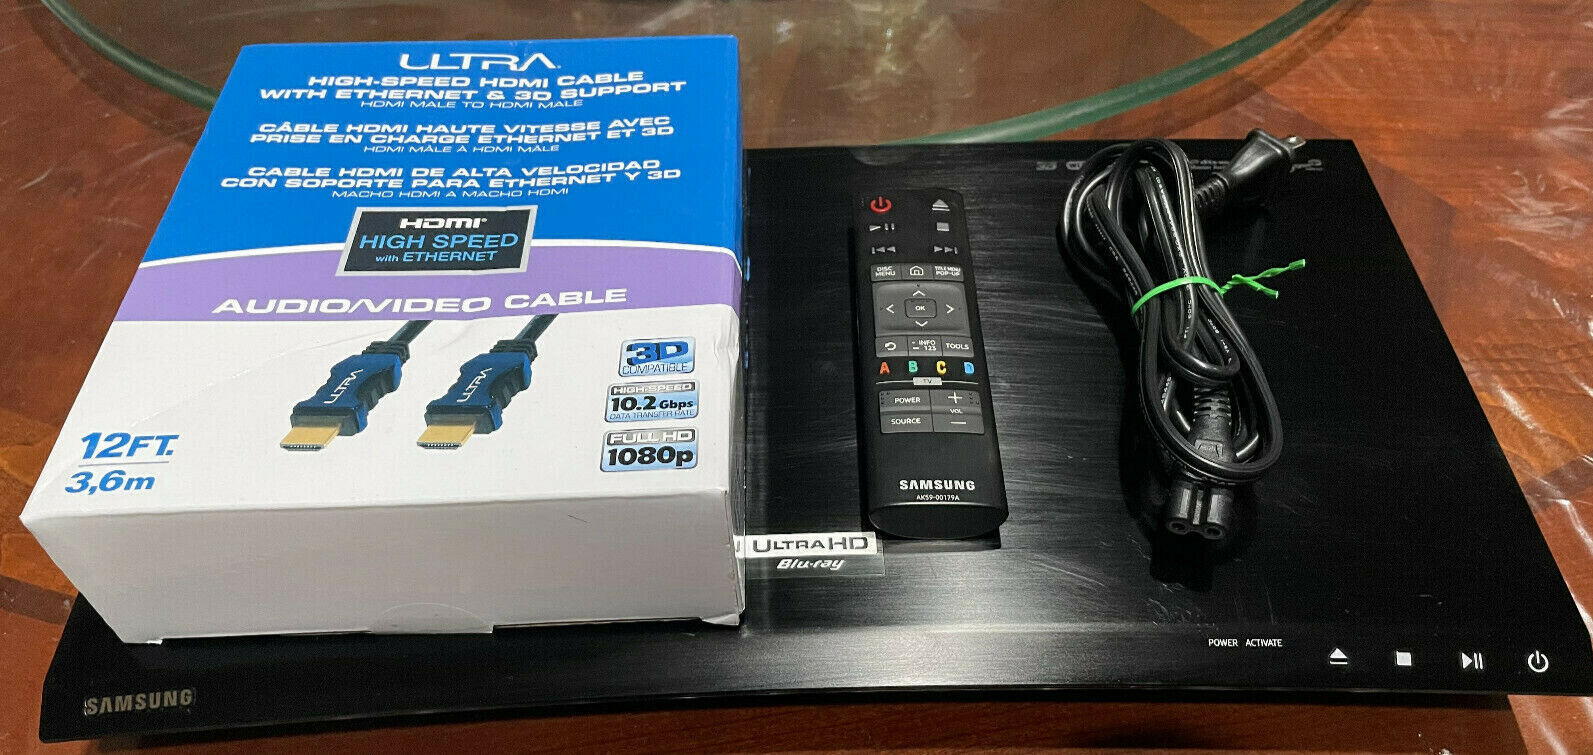 Samsung UBD-K8500 4K Ultra HD 3D Wi-Fi Blu-ray player + Remote 4K Cable - Tested